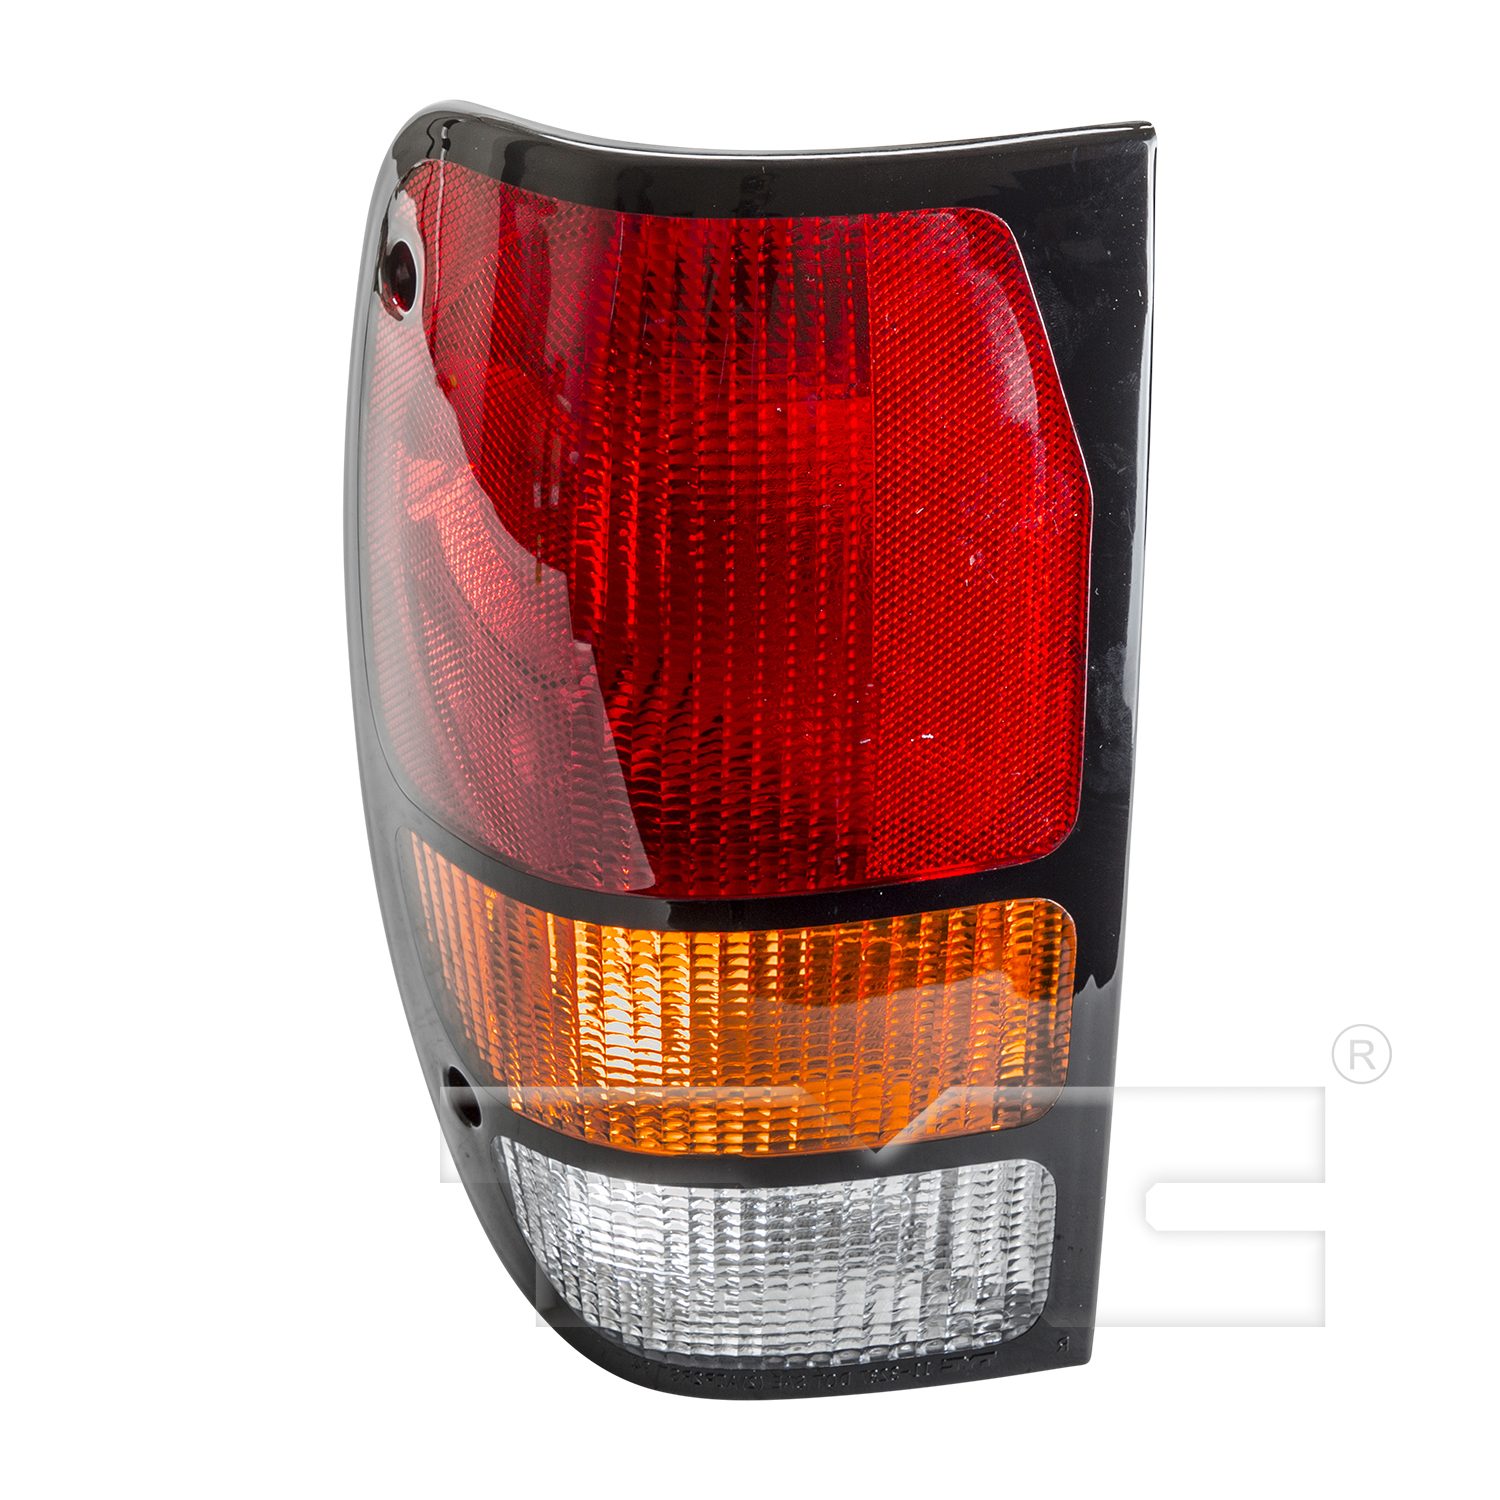 Aftermarket TAILLIGHTS for MAZDA - B3000, B3000,94-00,LT Taillamp assy